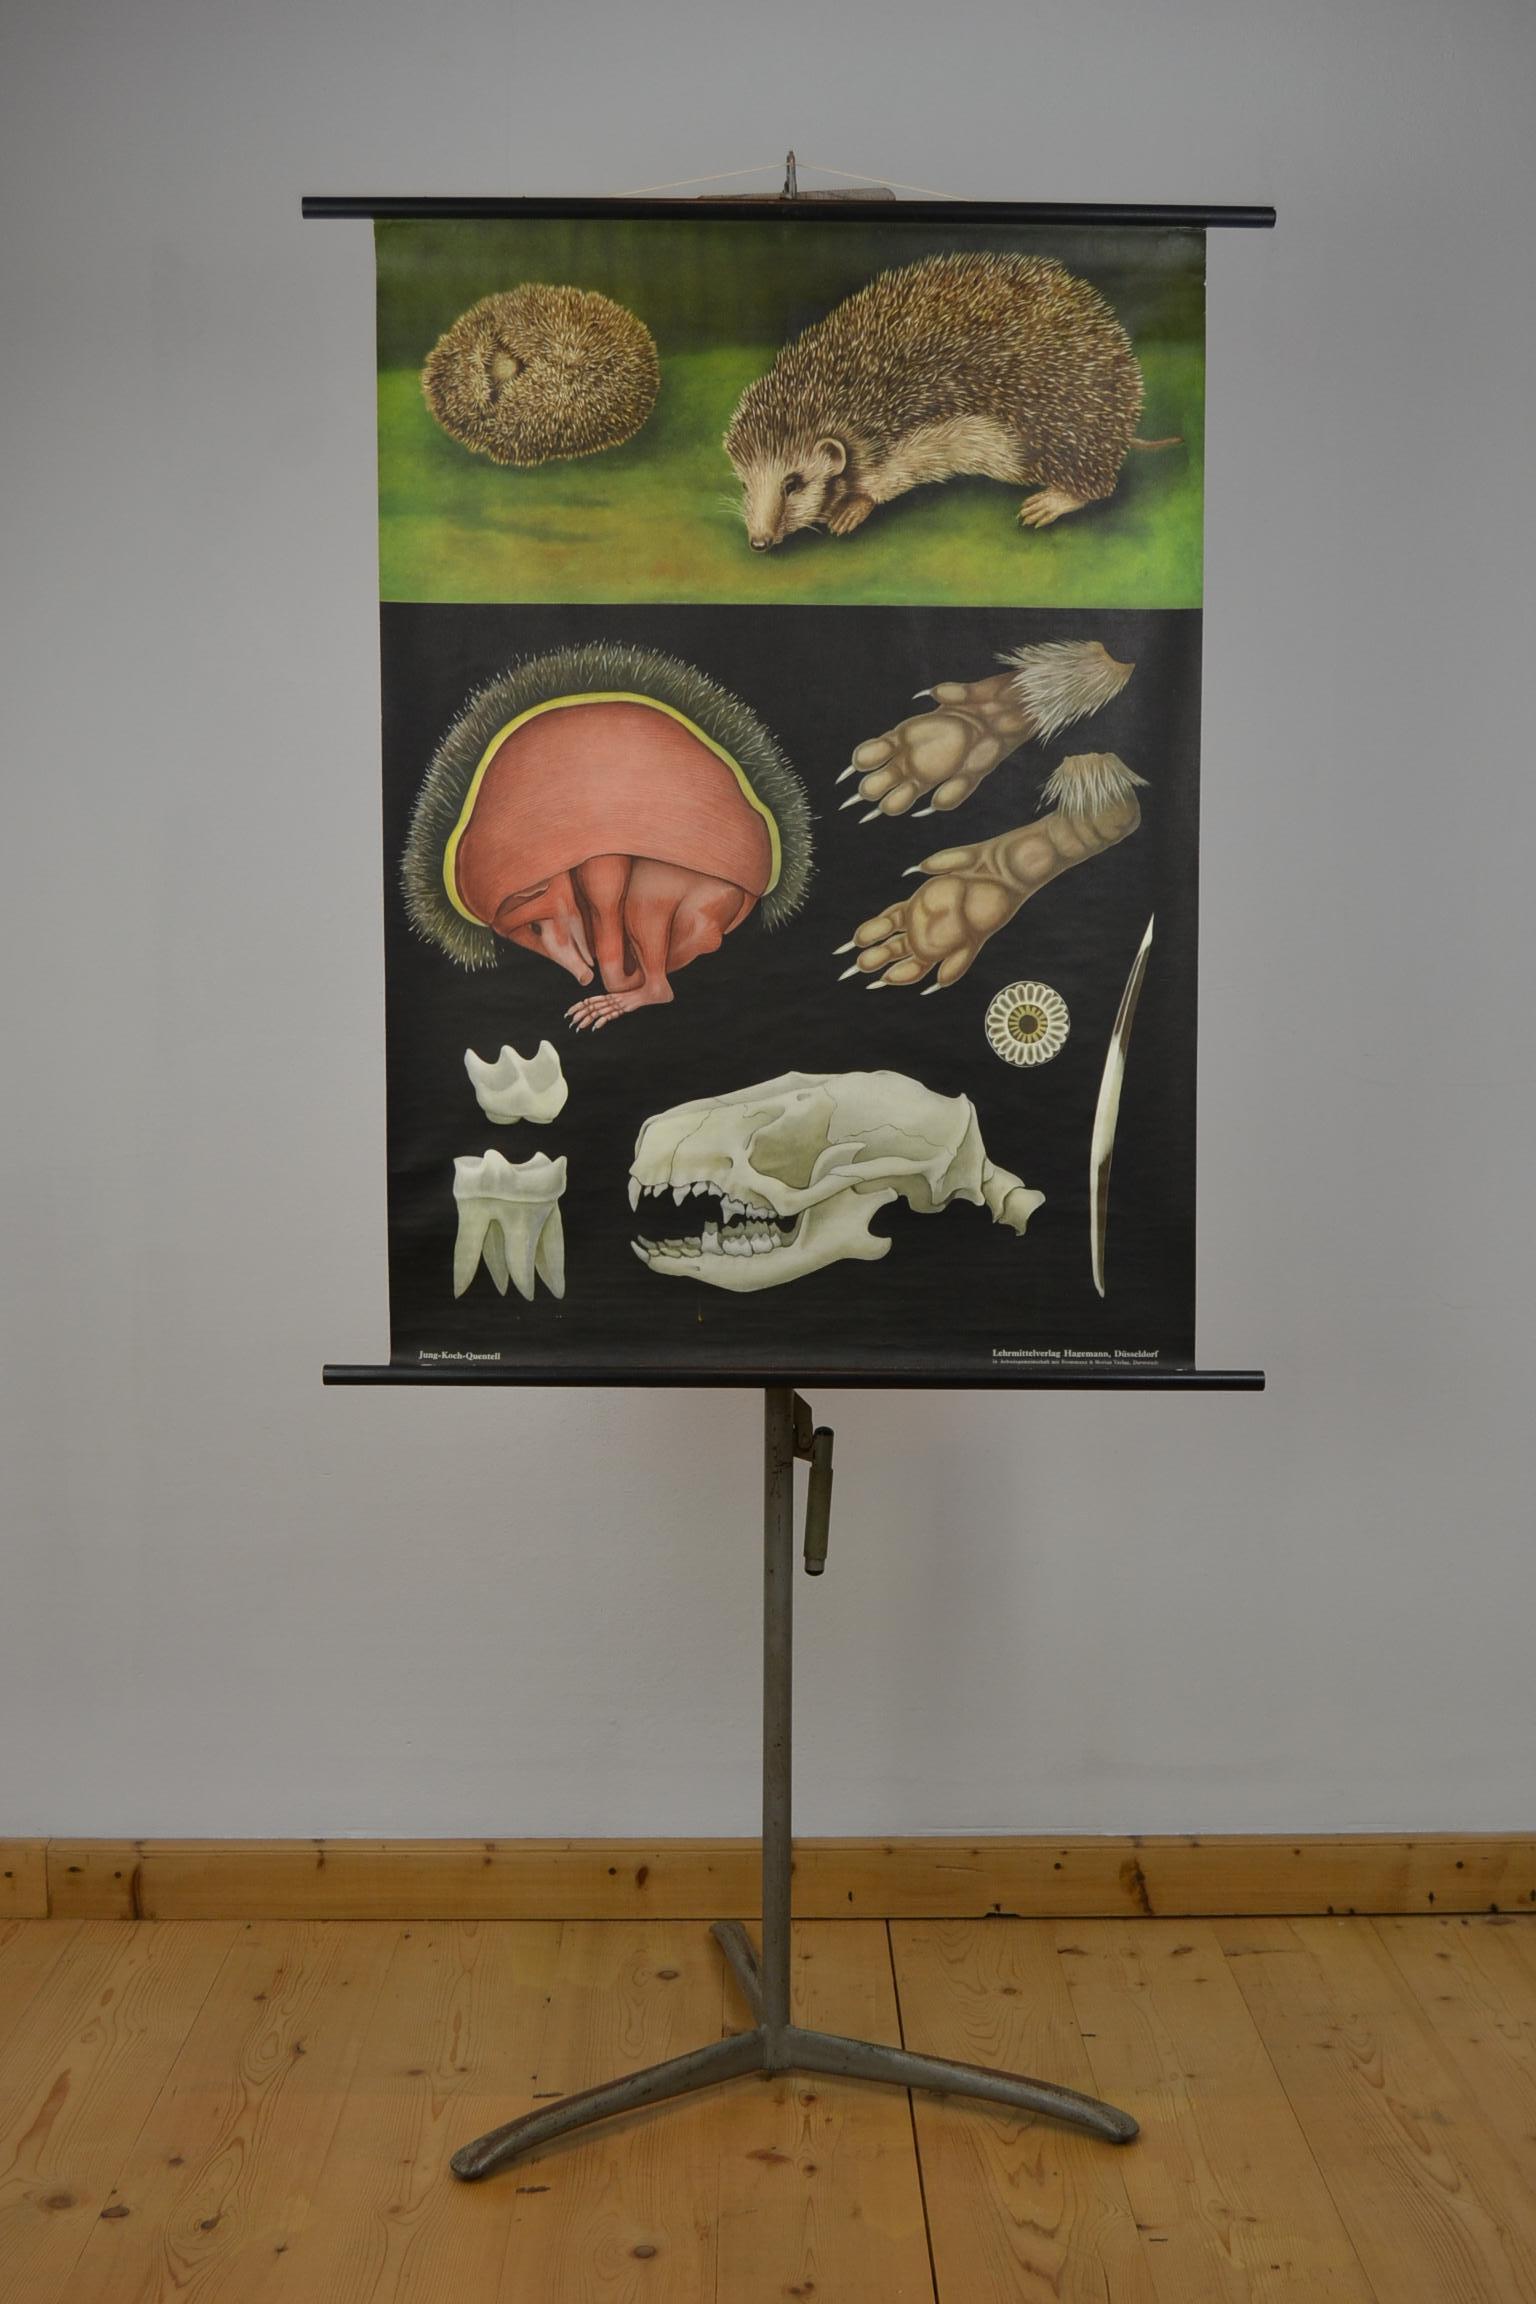 1960s canvas wall school chart,
Pull down chart with beautiful illustration of the hedgehog.
It shows the anatomical details of the animal on a black background.

This pull down map with animal theme is printed on paper and backed with canvas